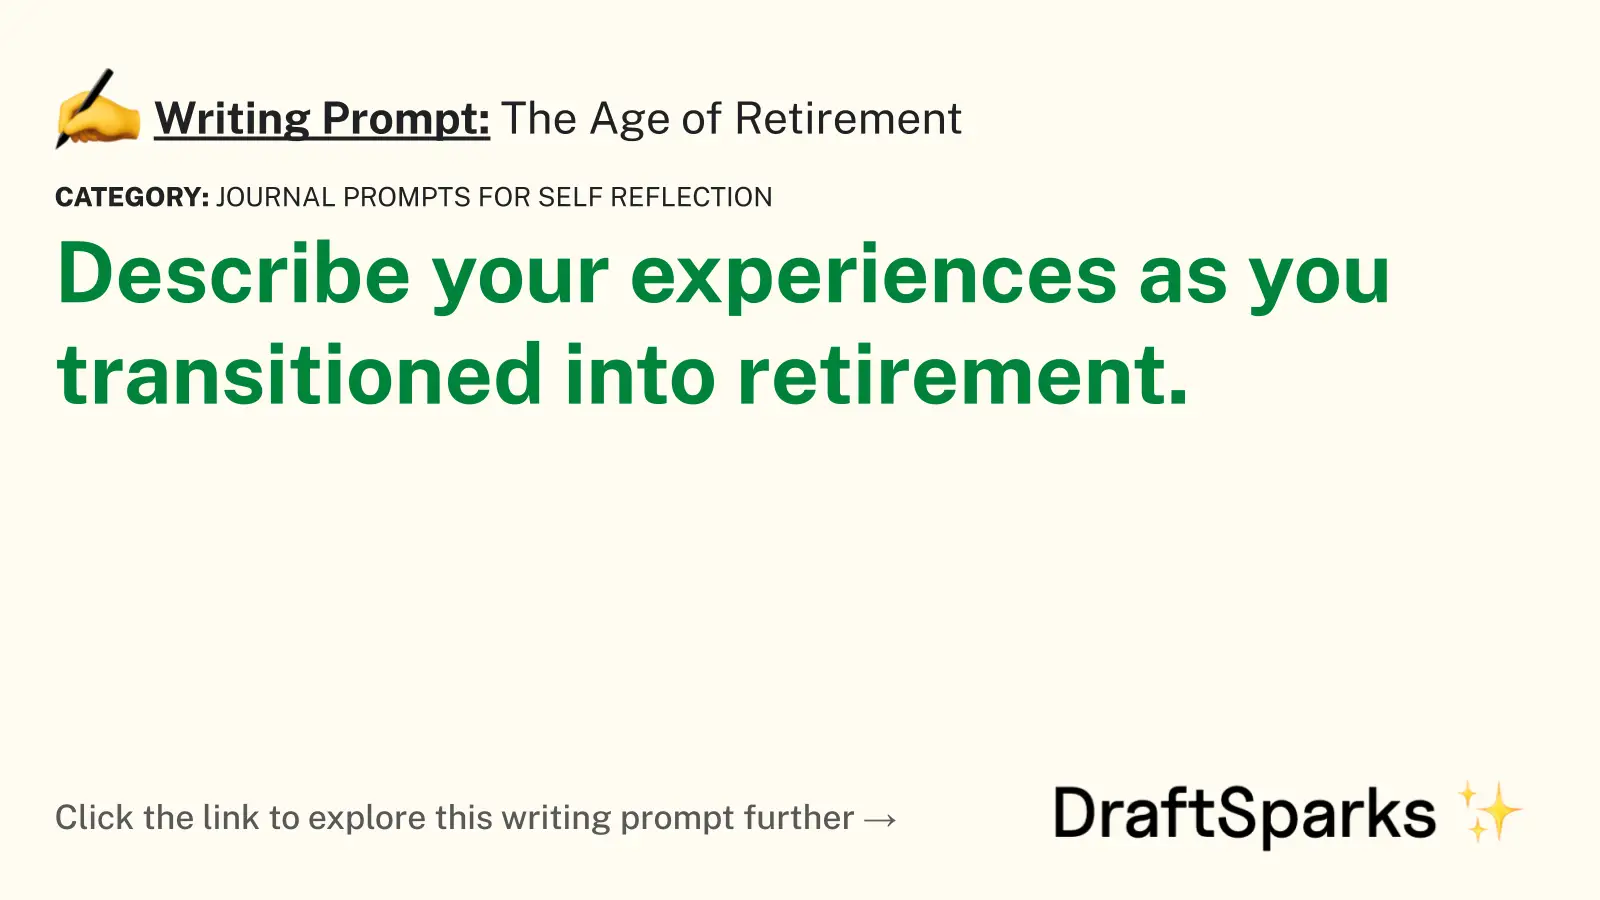 The Age of Retirement